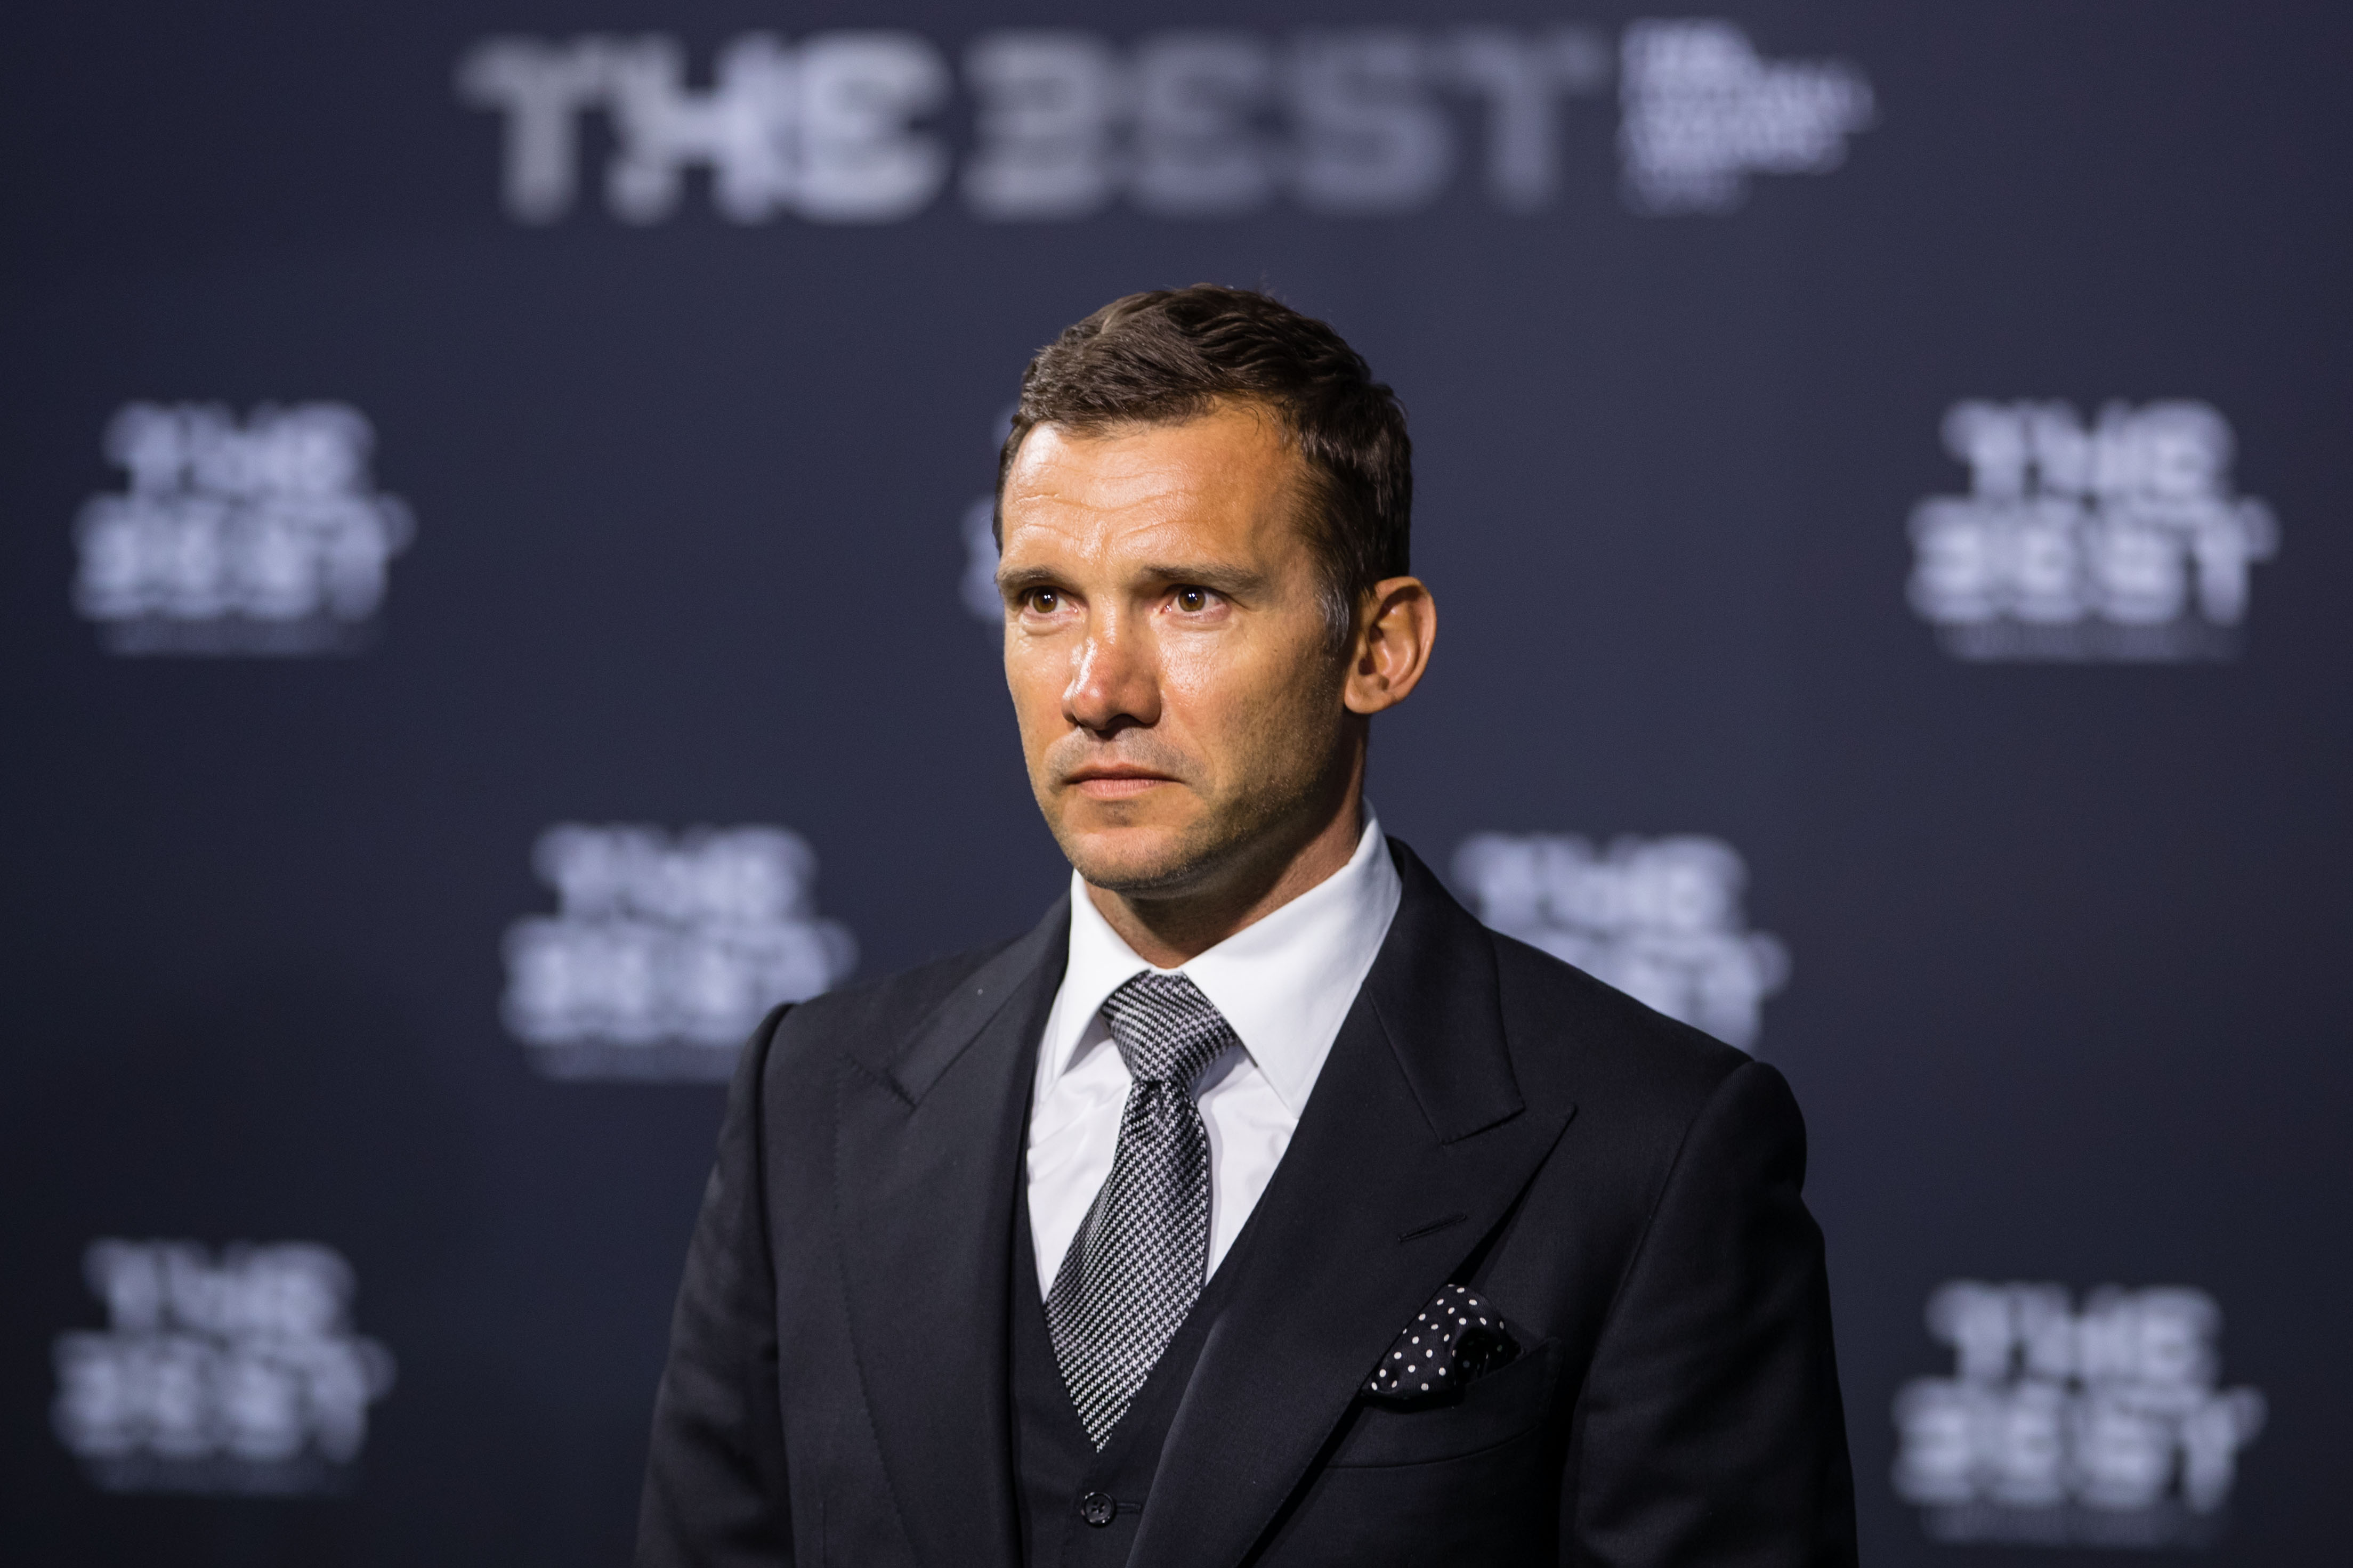 Shevchenko: “Milan & Inter Are Finding The Right Path, They Have To Take Things Step-By-Step”